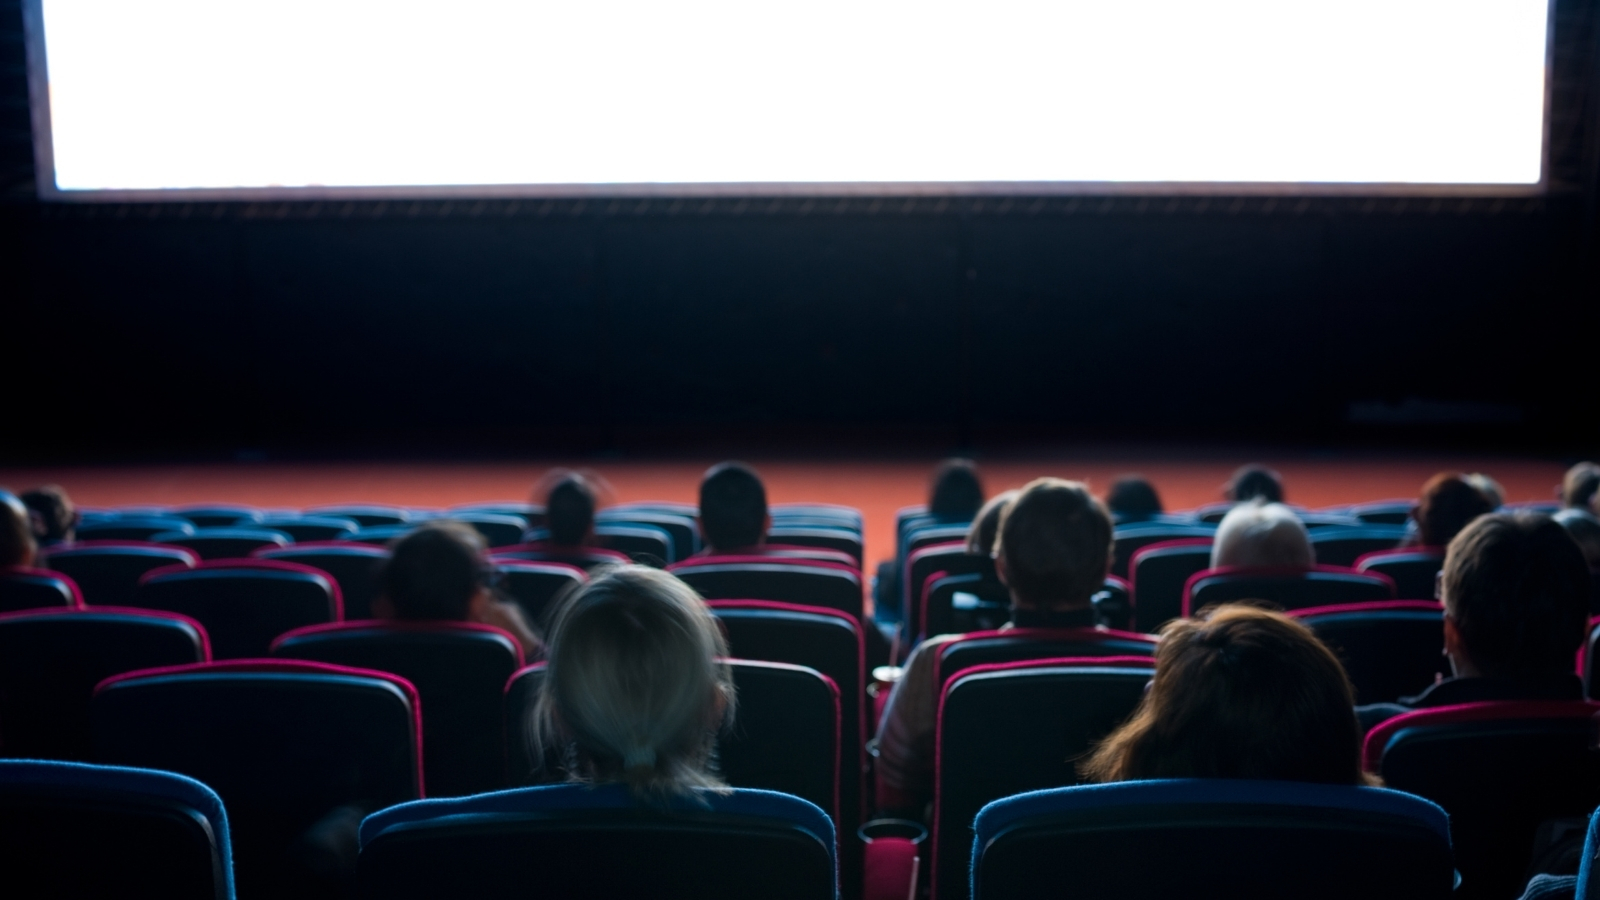 Rearview of a cinema audience section - there is a small group of people spread out on different cinema seats that are red and black. A large white cinema screen sits in front of them